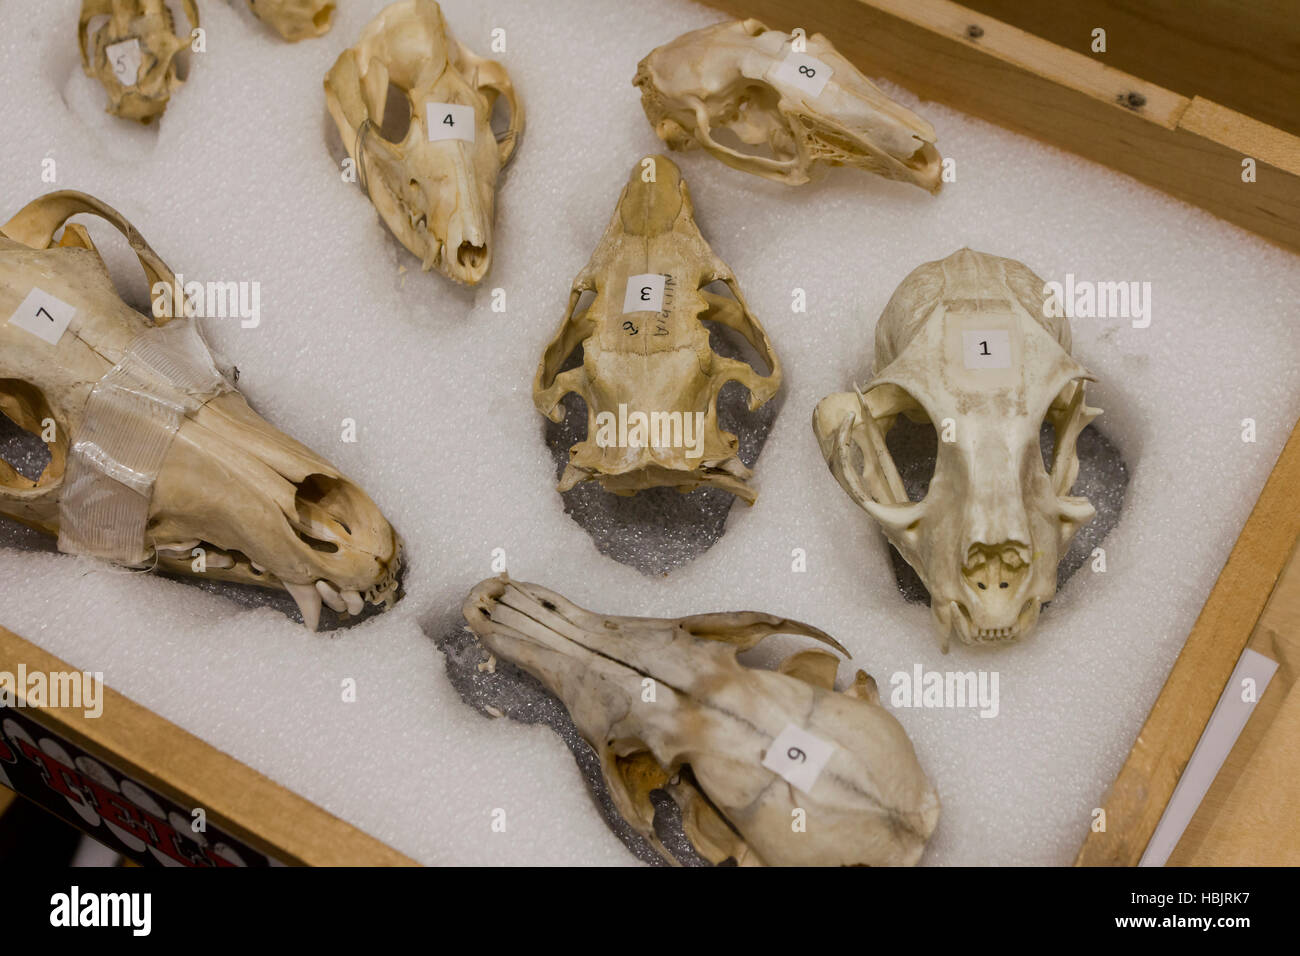 Skulls of various small mammals used in Biology class - USA Stock Photo